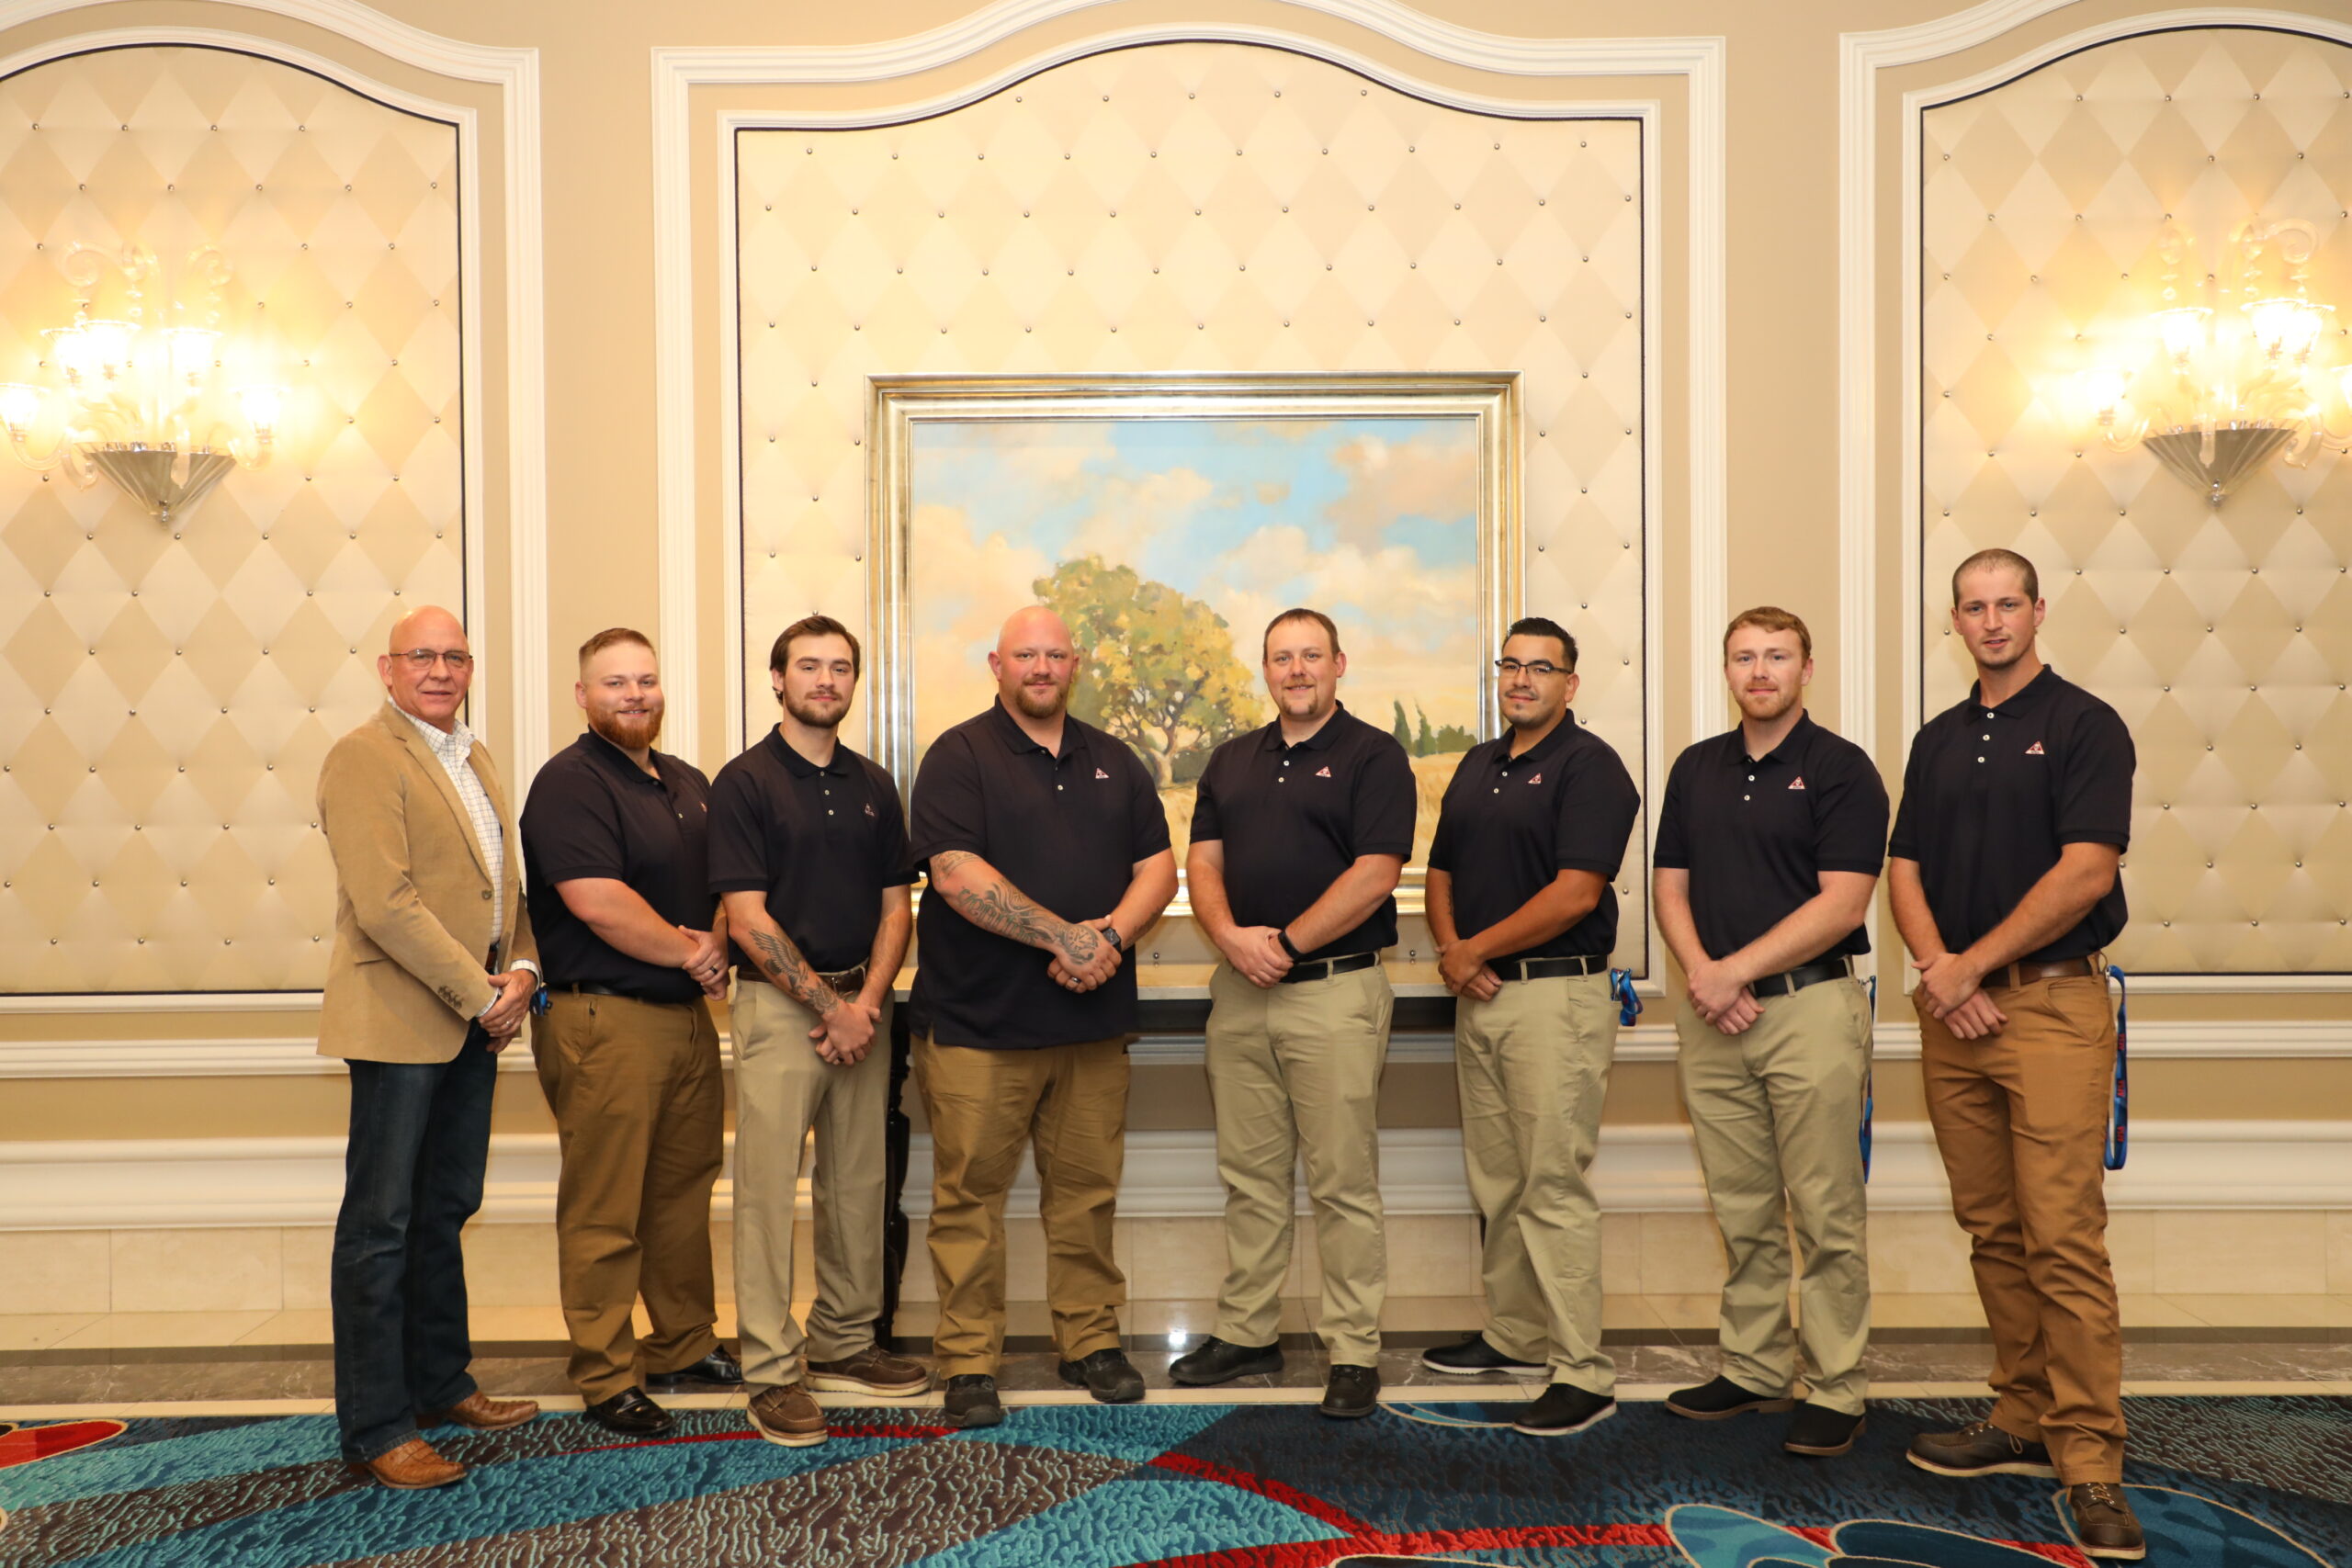 National Apprentice Competition Chair Jeff Phifer, AFSA Region 5 Director, was proud to present the seven finalists for the 2022 National Apprentice Competition during the General Session. From left to right: Phifer and the seven finalists: Tyler Amundson, Daniel Kohler, Andrew Callahan, Andrew Lynch, Antonio Rosario, Matthew Comp, and Jacob Hanson.